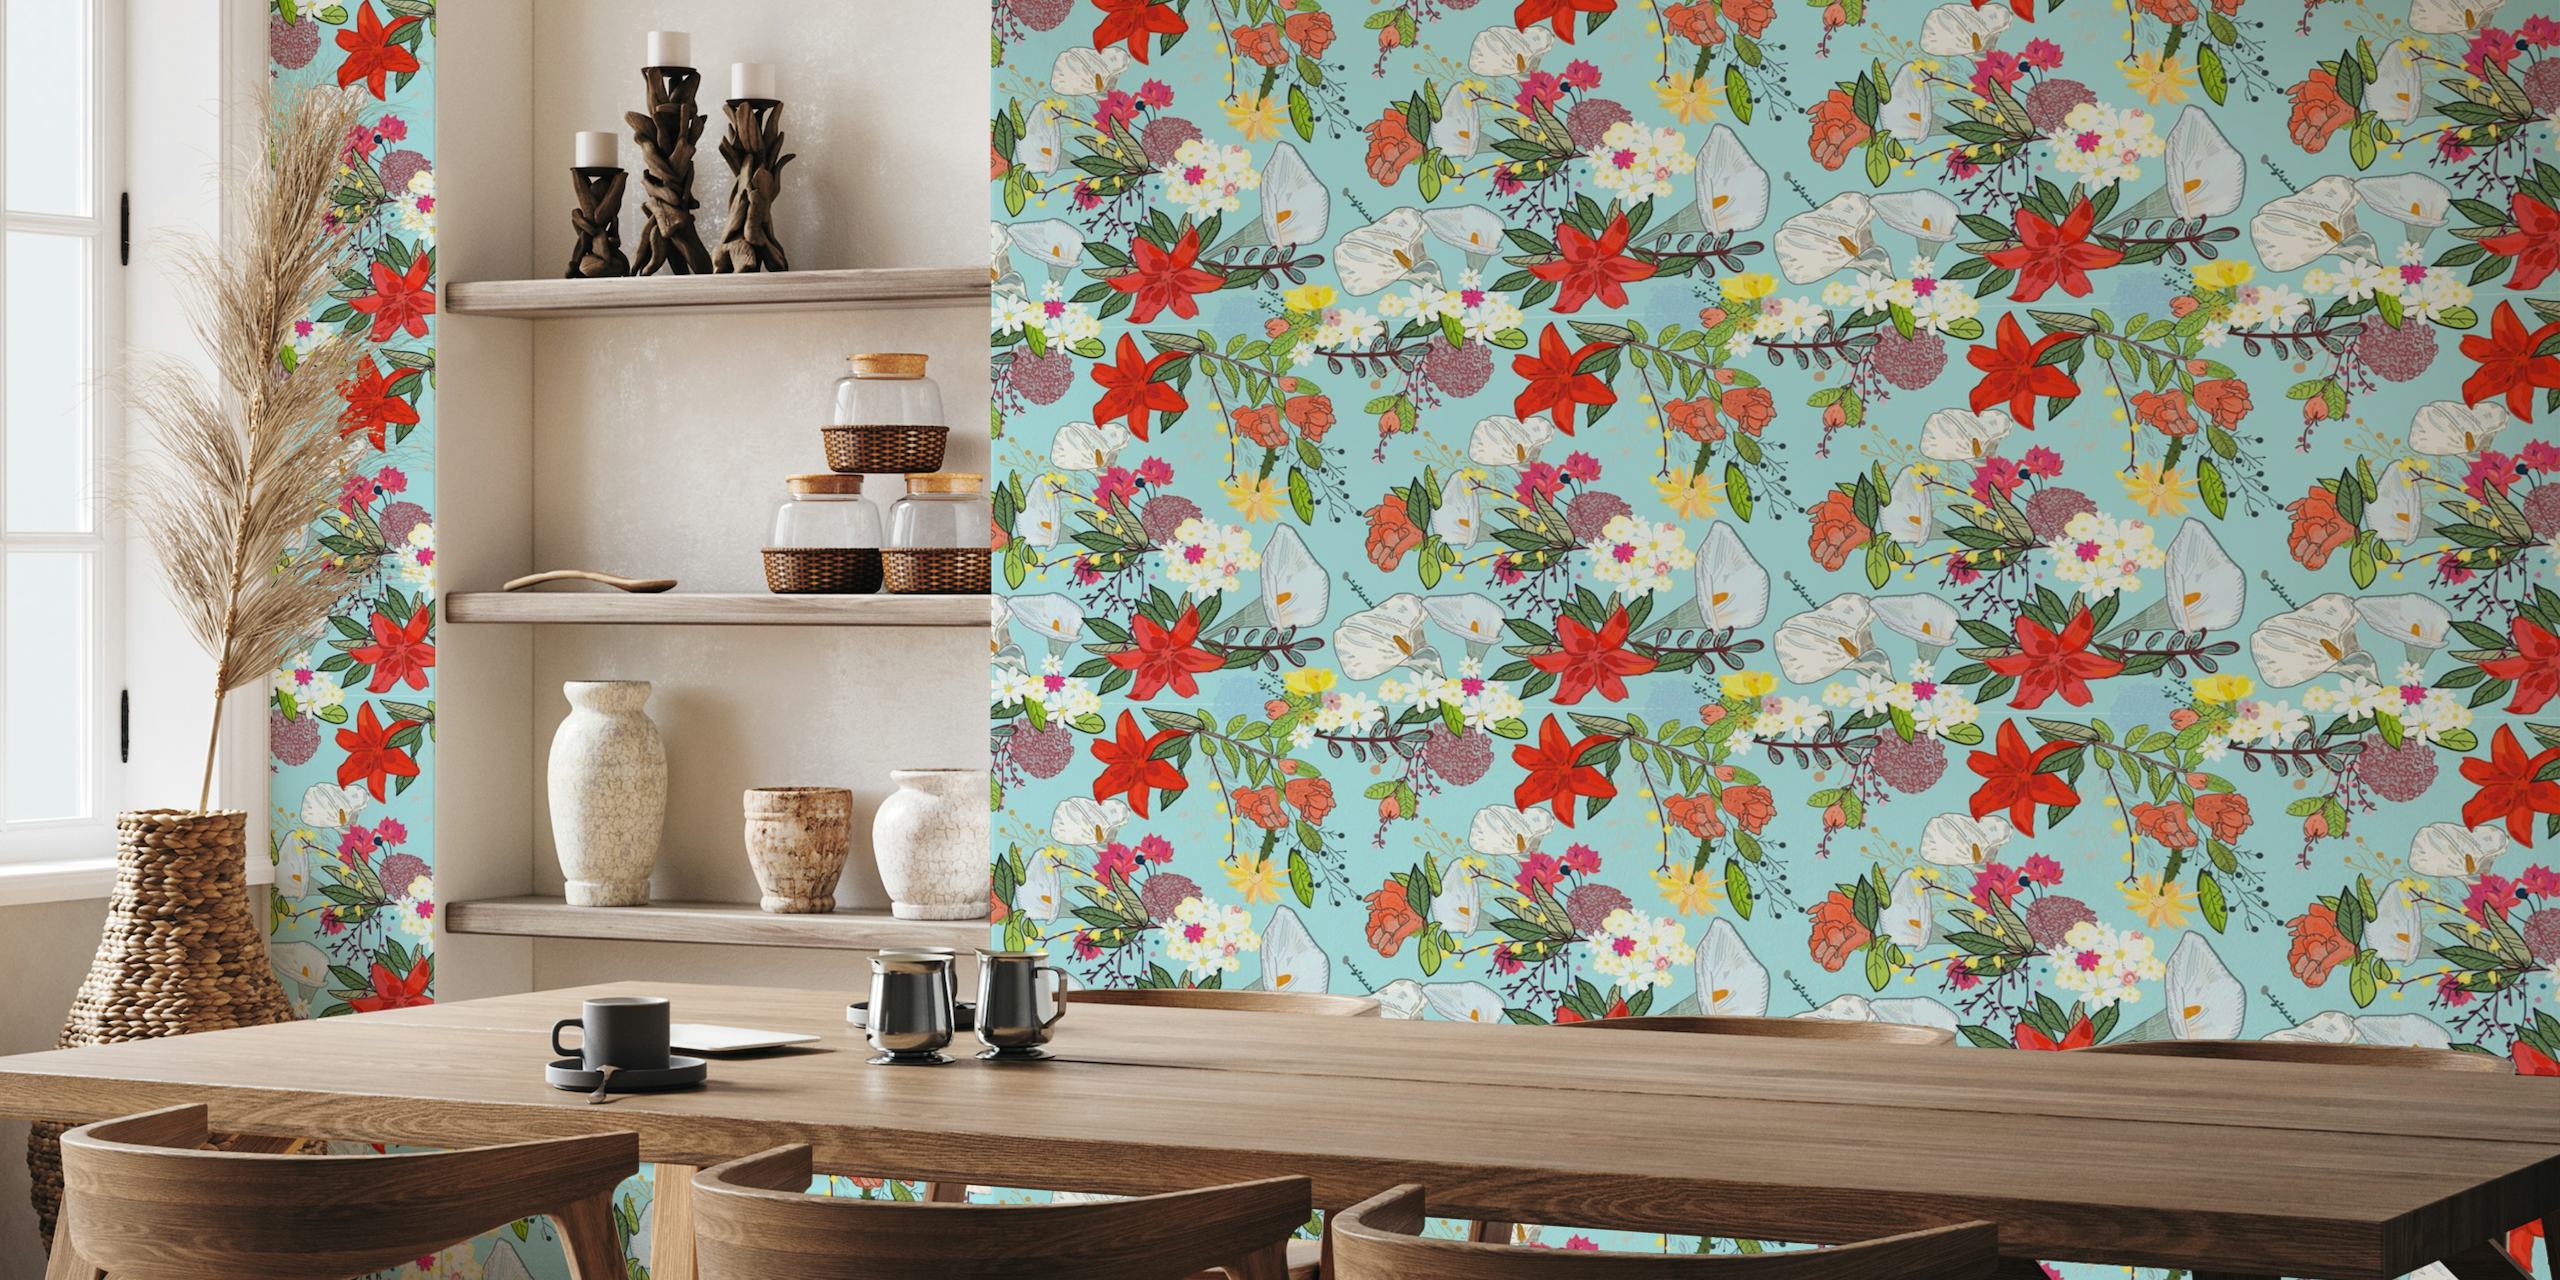 Pomegranate and Lily Pattern Wall Mural with vibrant flowers and fruits on a blue background